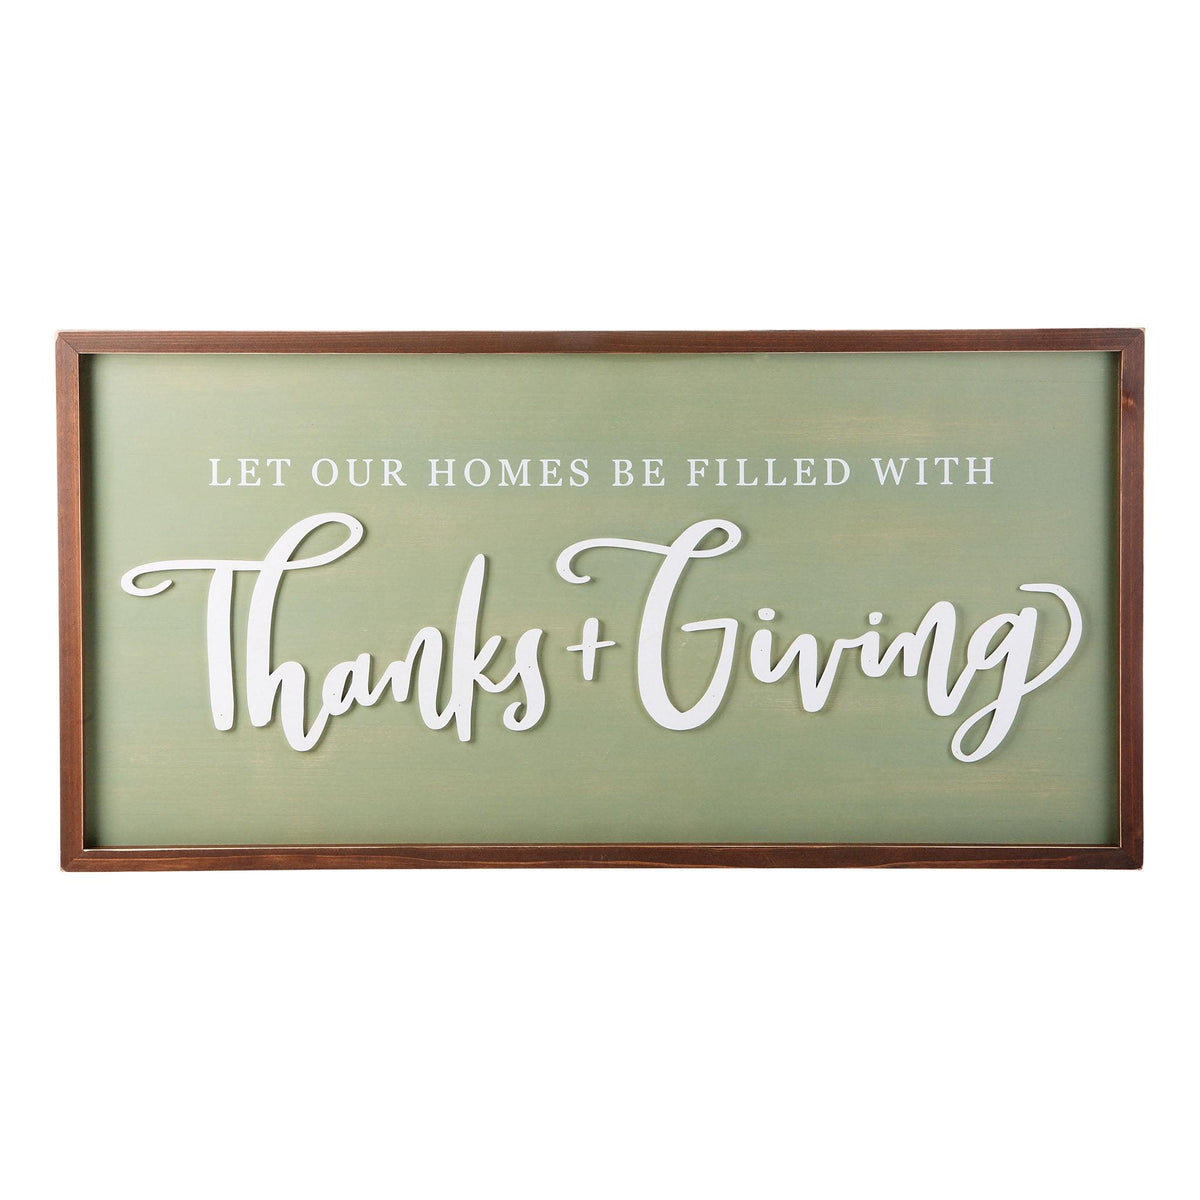 Thanks and Giving Board - GLORY HAUS 